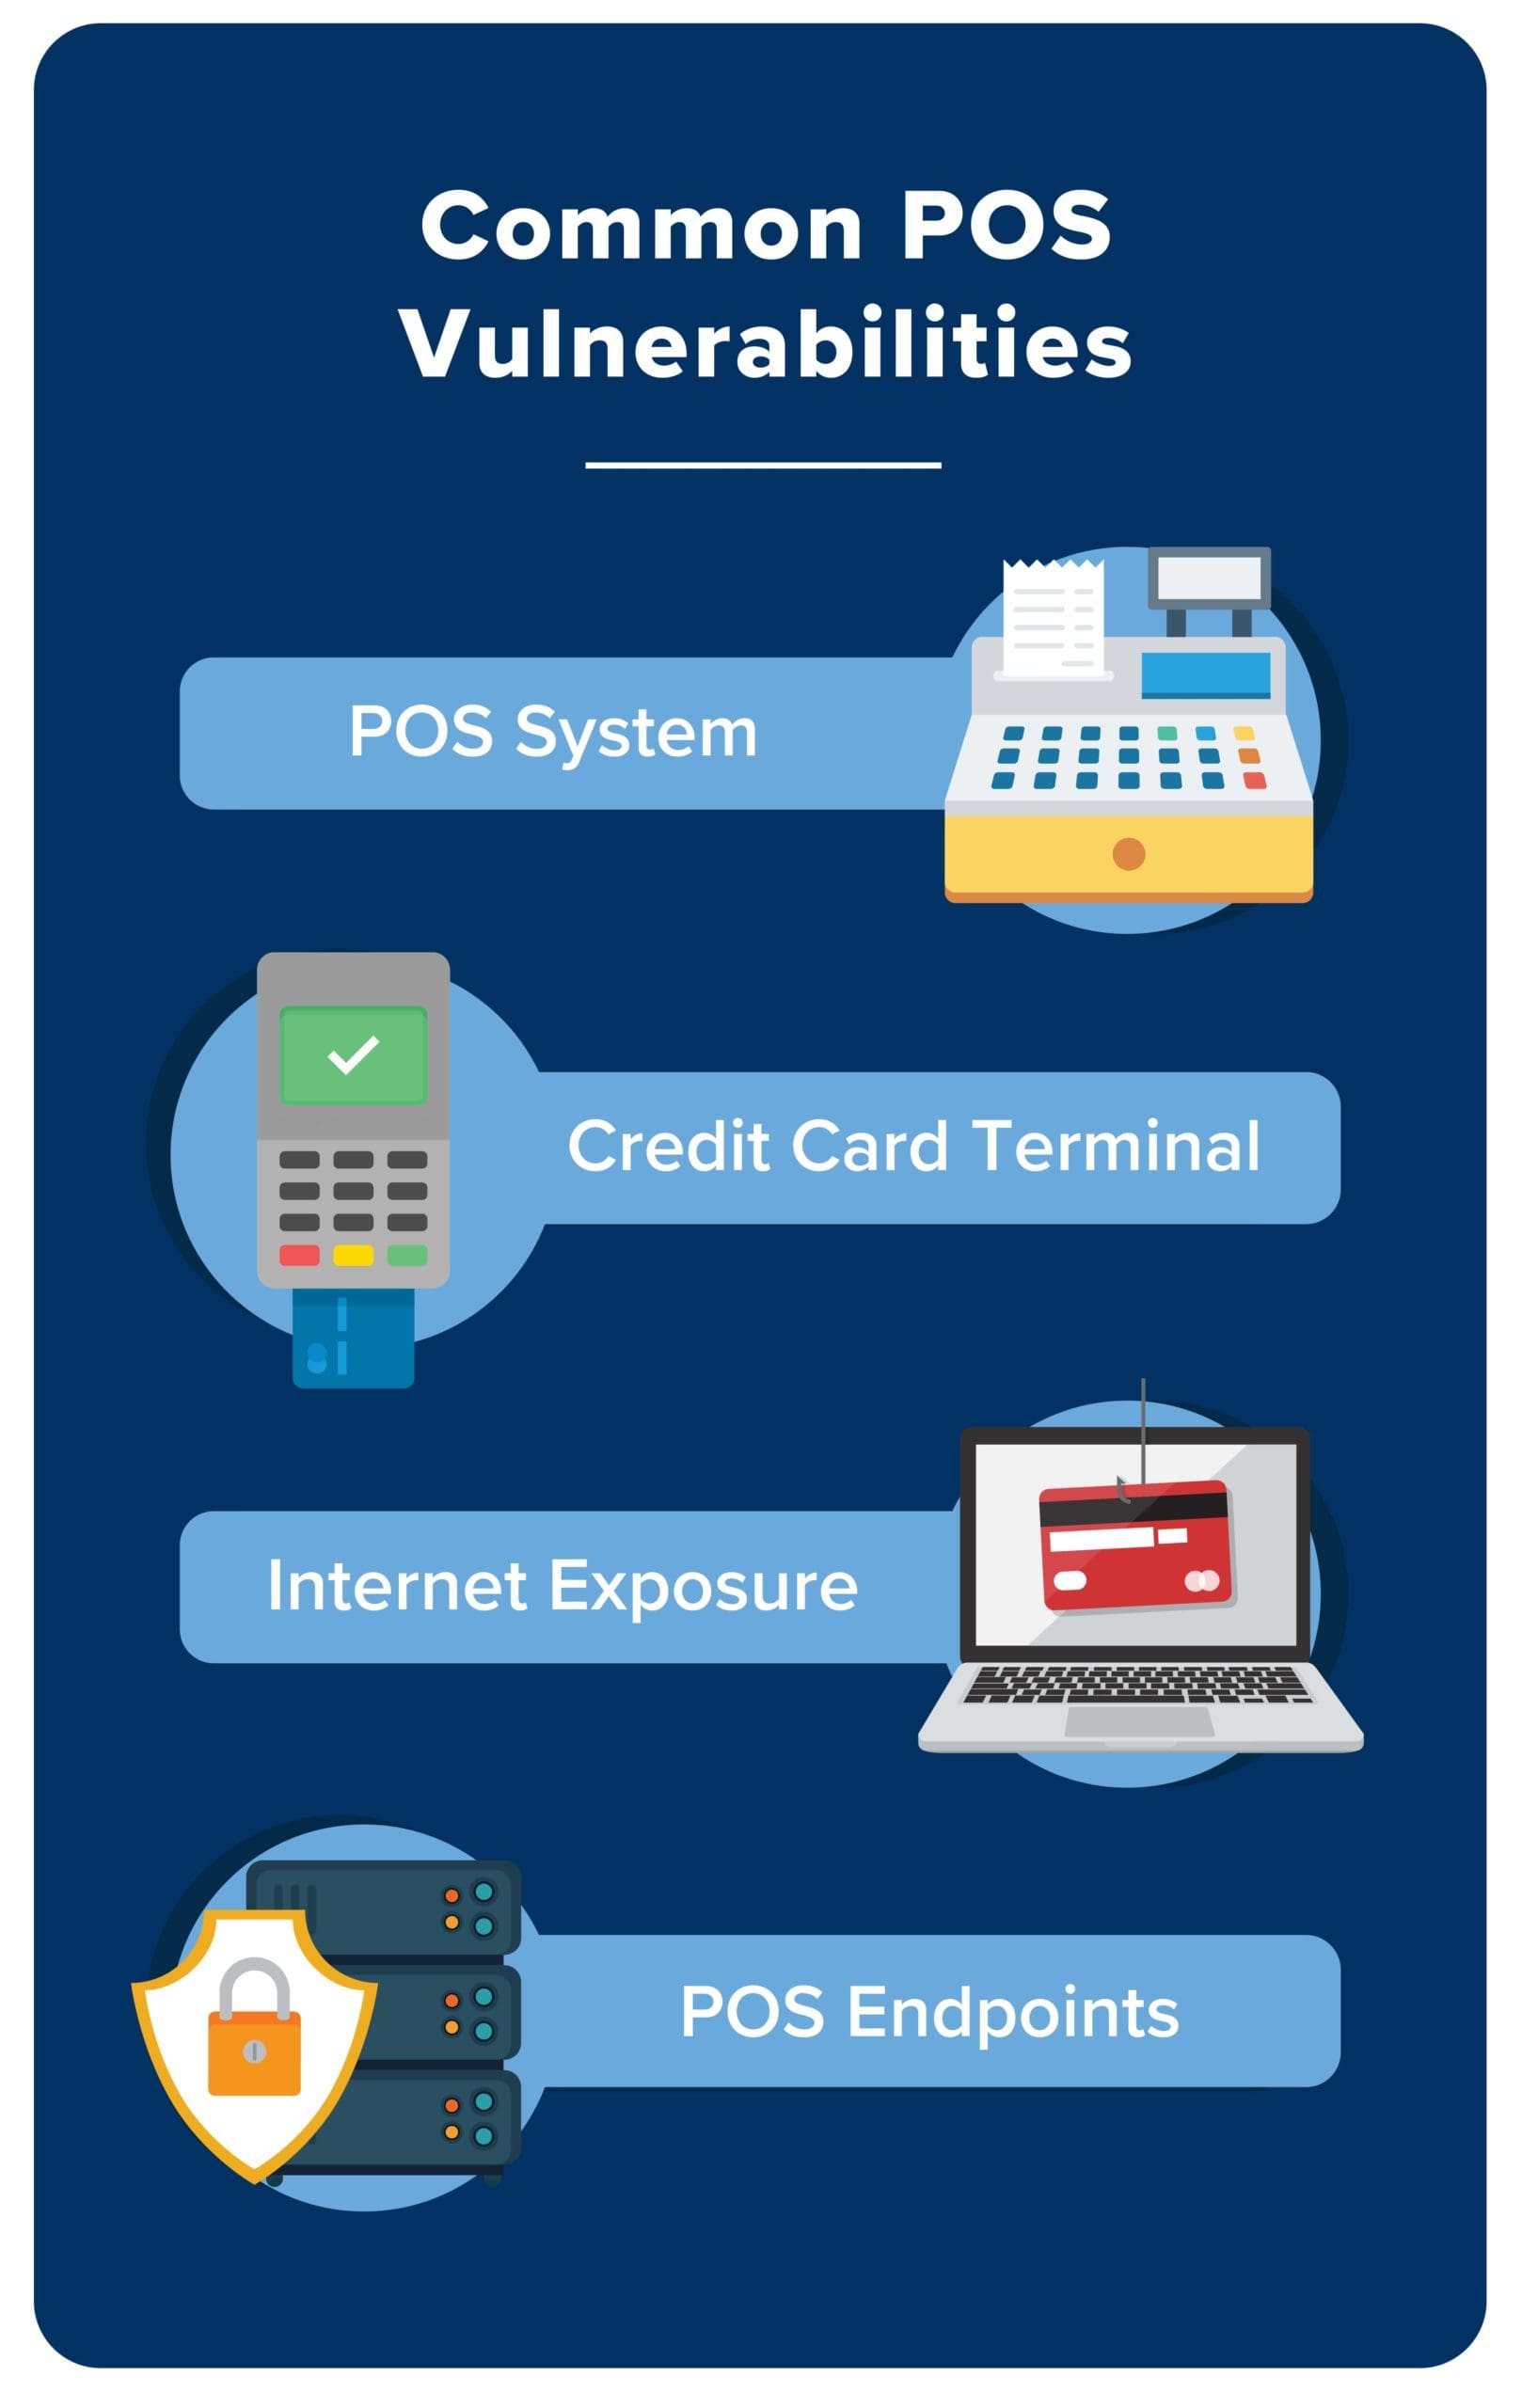 graphic depicting POS vulnerabilities including POS systems, Credit Card Terminals, Internet Exposure and POS Endpoints